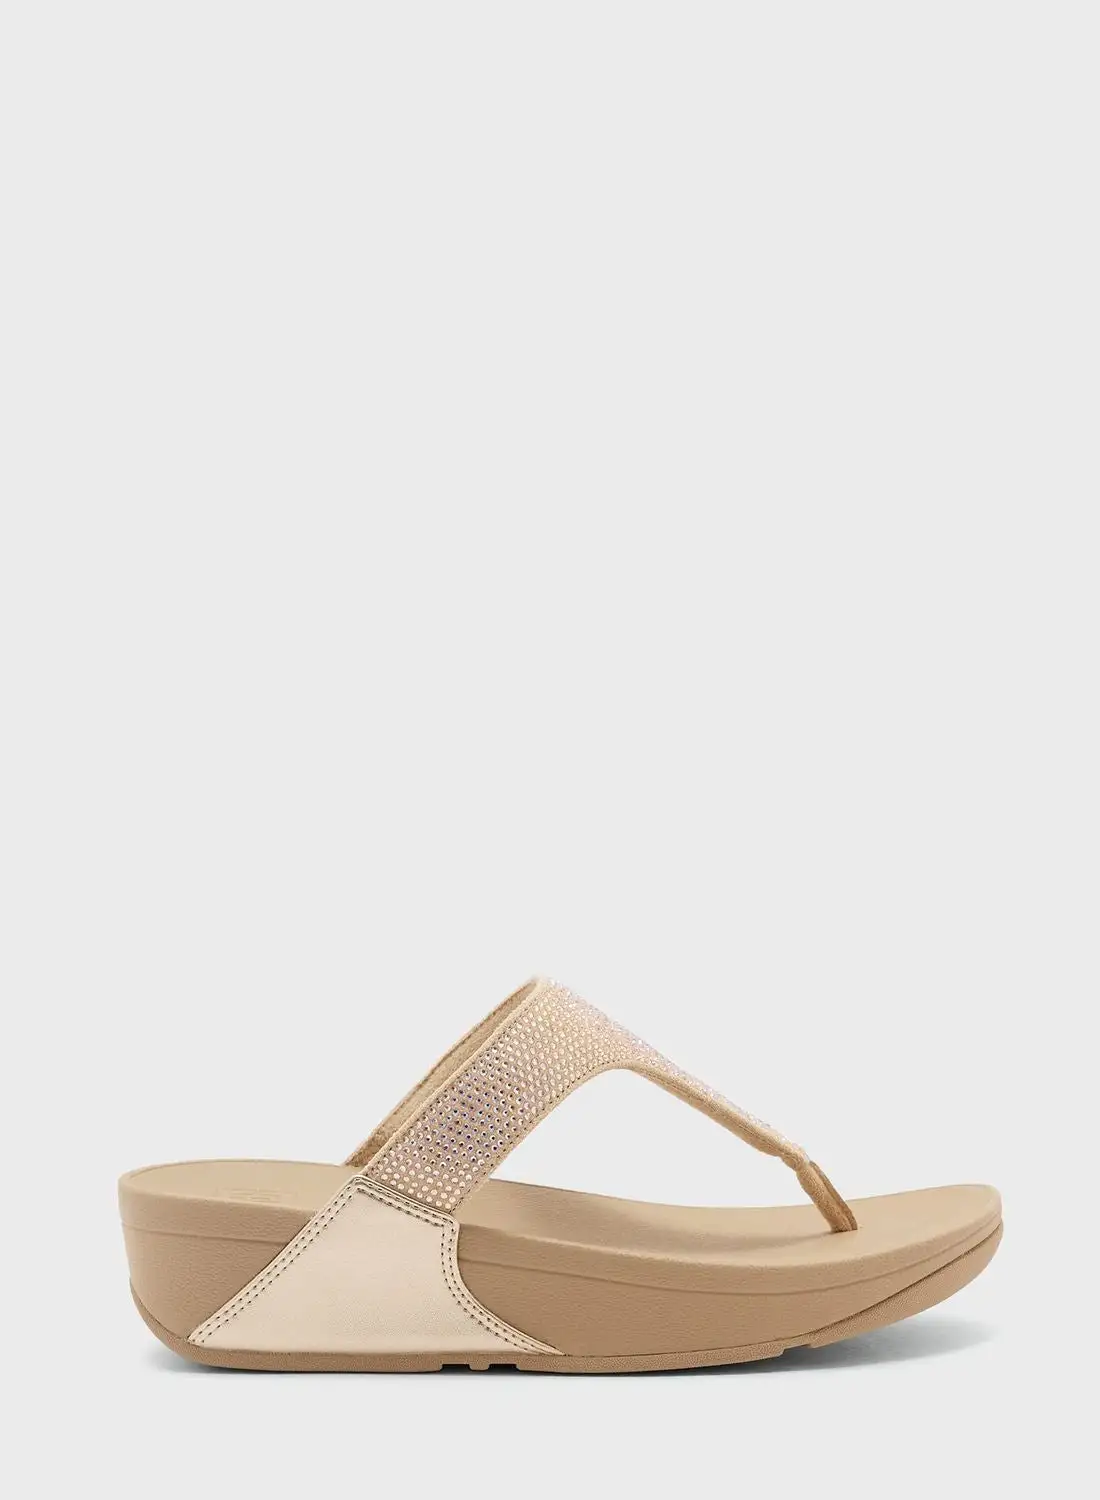 fitflop Single Strap Wedge Sandals